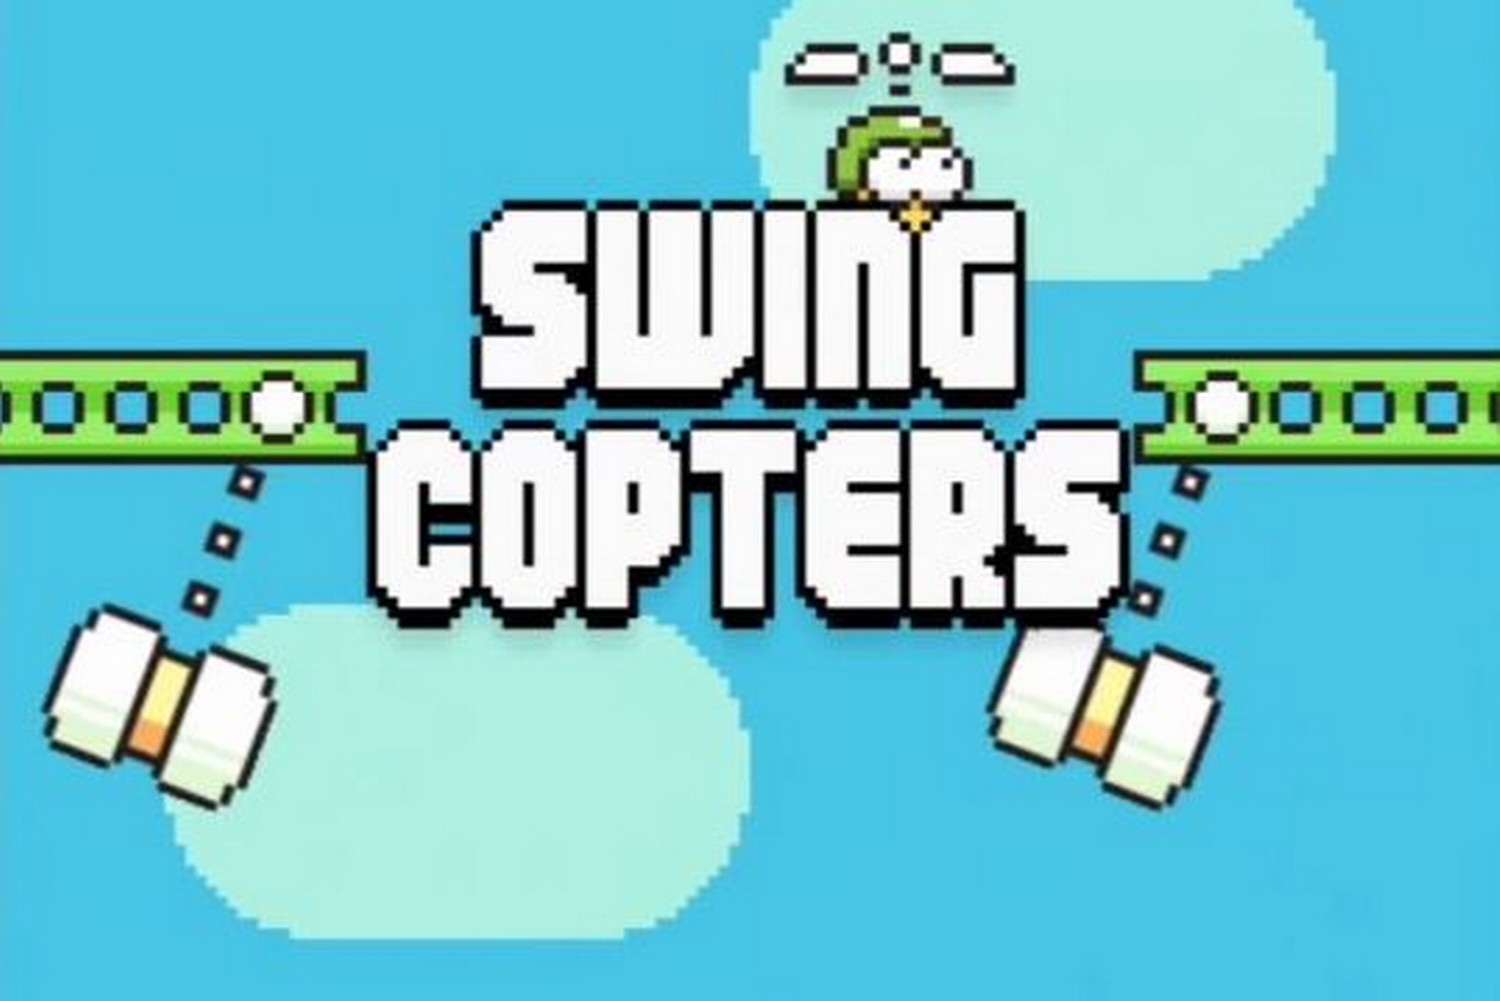 Swing+Copters - Game cho Android: Ninja Up - nhảy nhảy nhảy